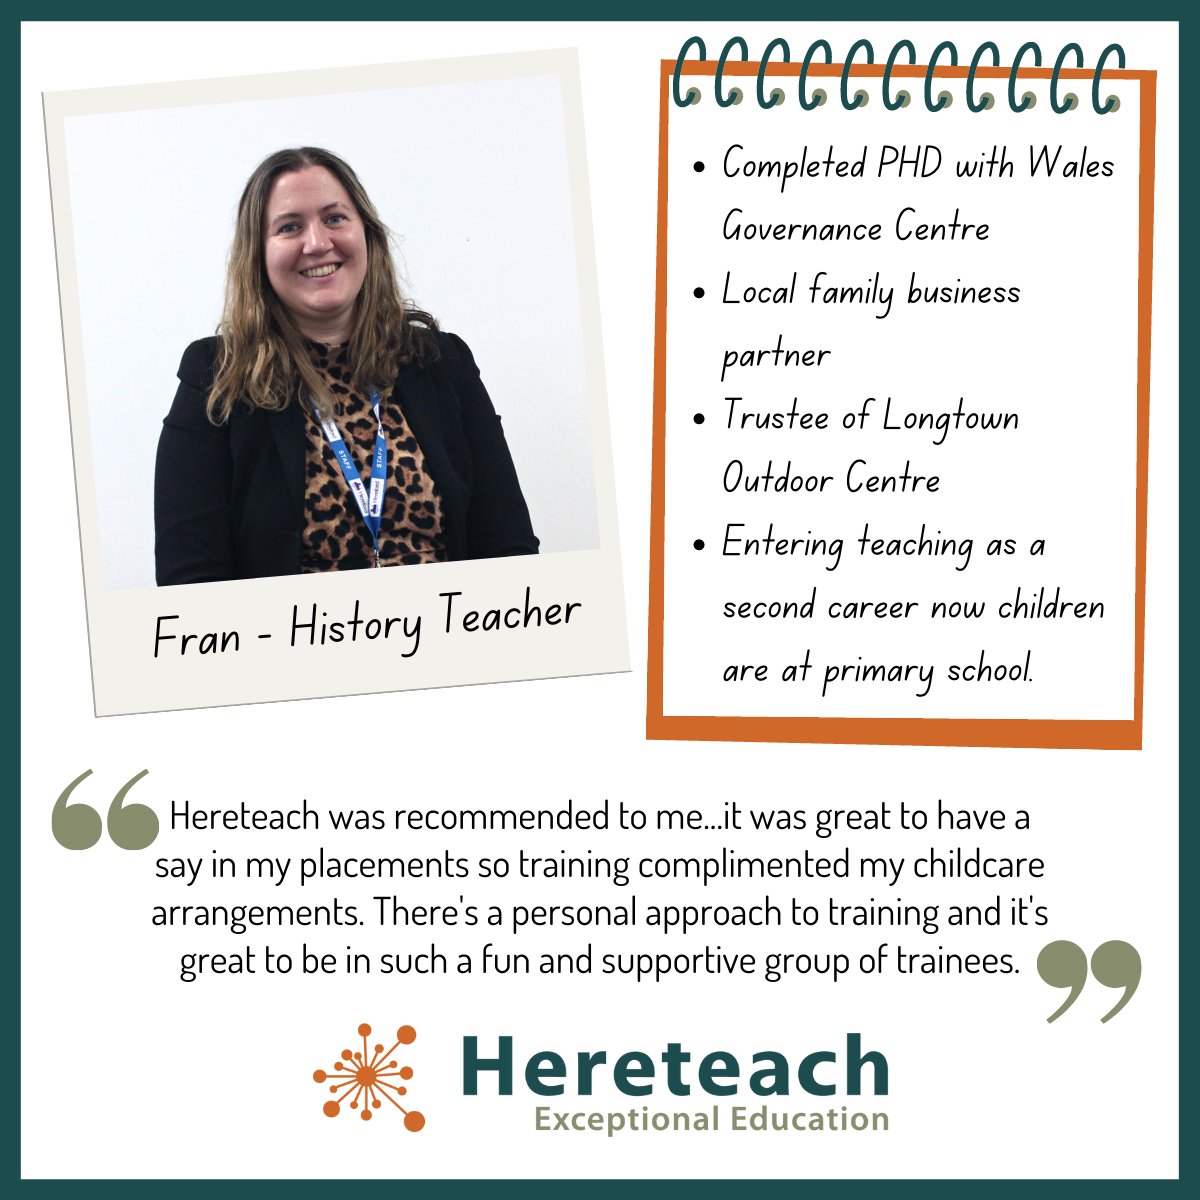 Thinking of a #careerchange? Meet Fran👋 

For more information on Hereteach and to get in touch visit hereford.ac.uk/the-college/he…

#Schoolsdirect #Herefordshire #Traineeteachers #Teaching #Shropshire #Worcestershire #Gloucestershire #teachertraining #inspireyoungminds